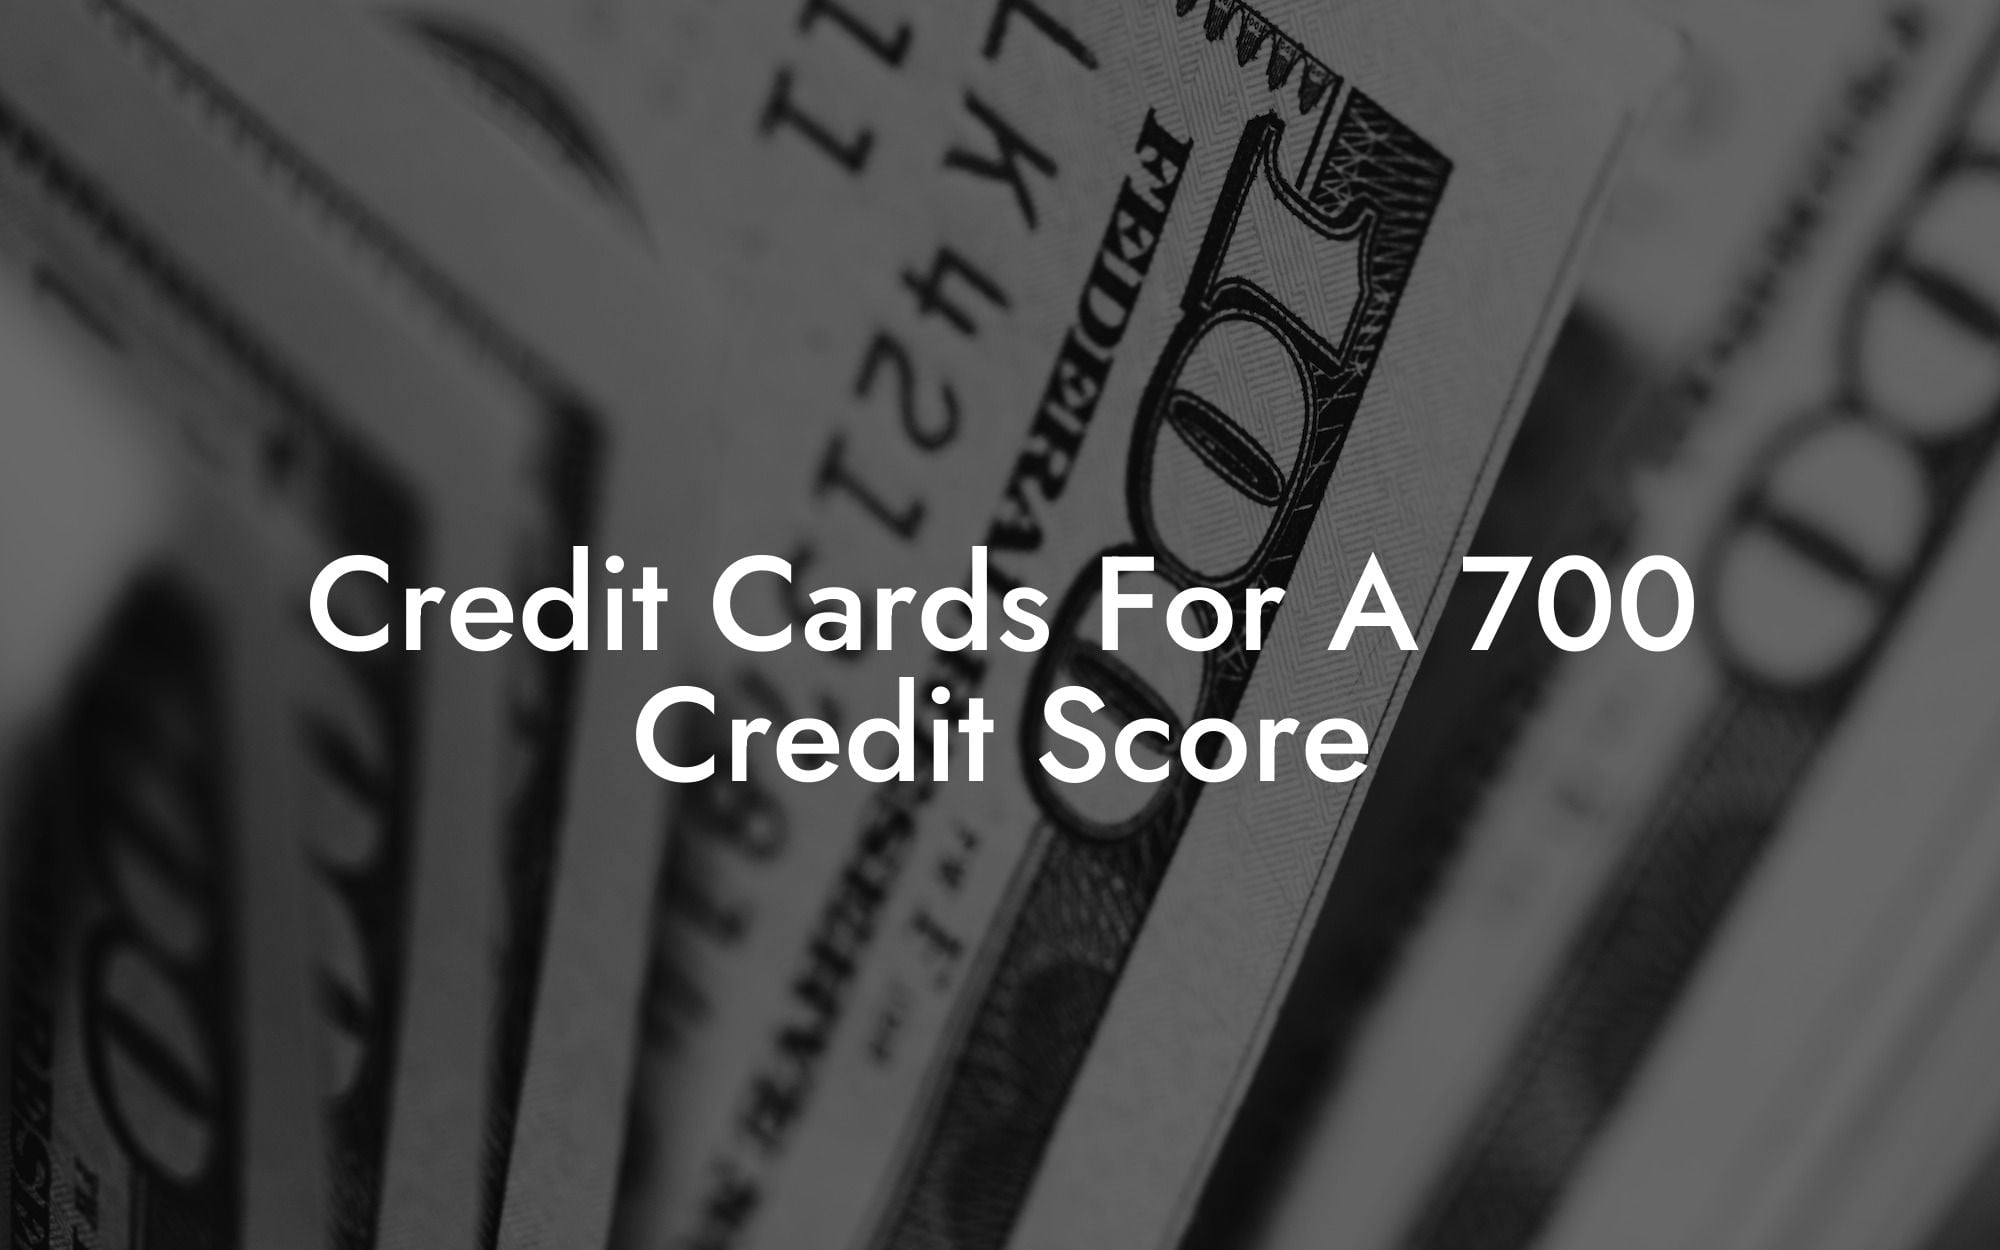 Credit Cards For A 700 Credit Score